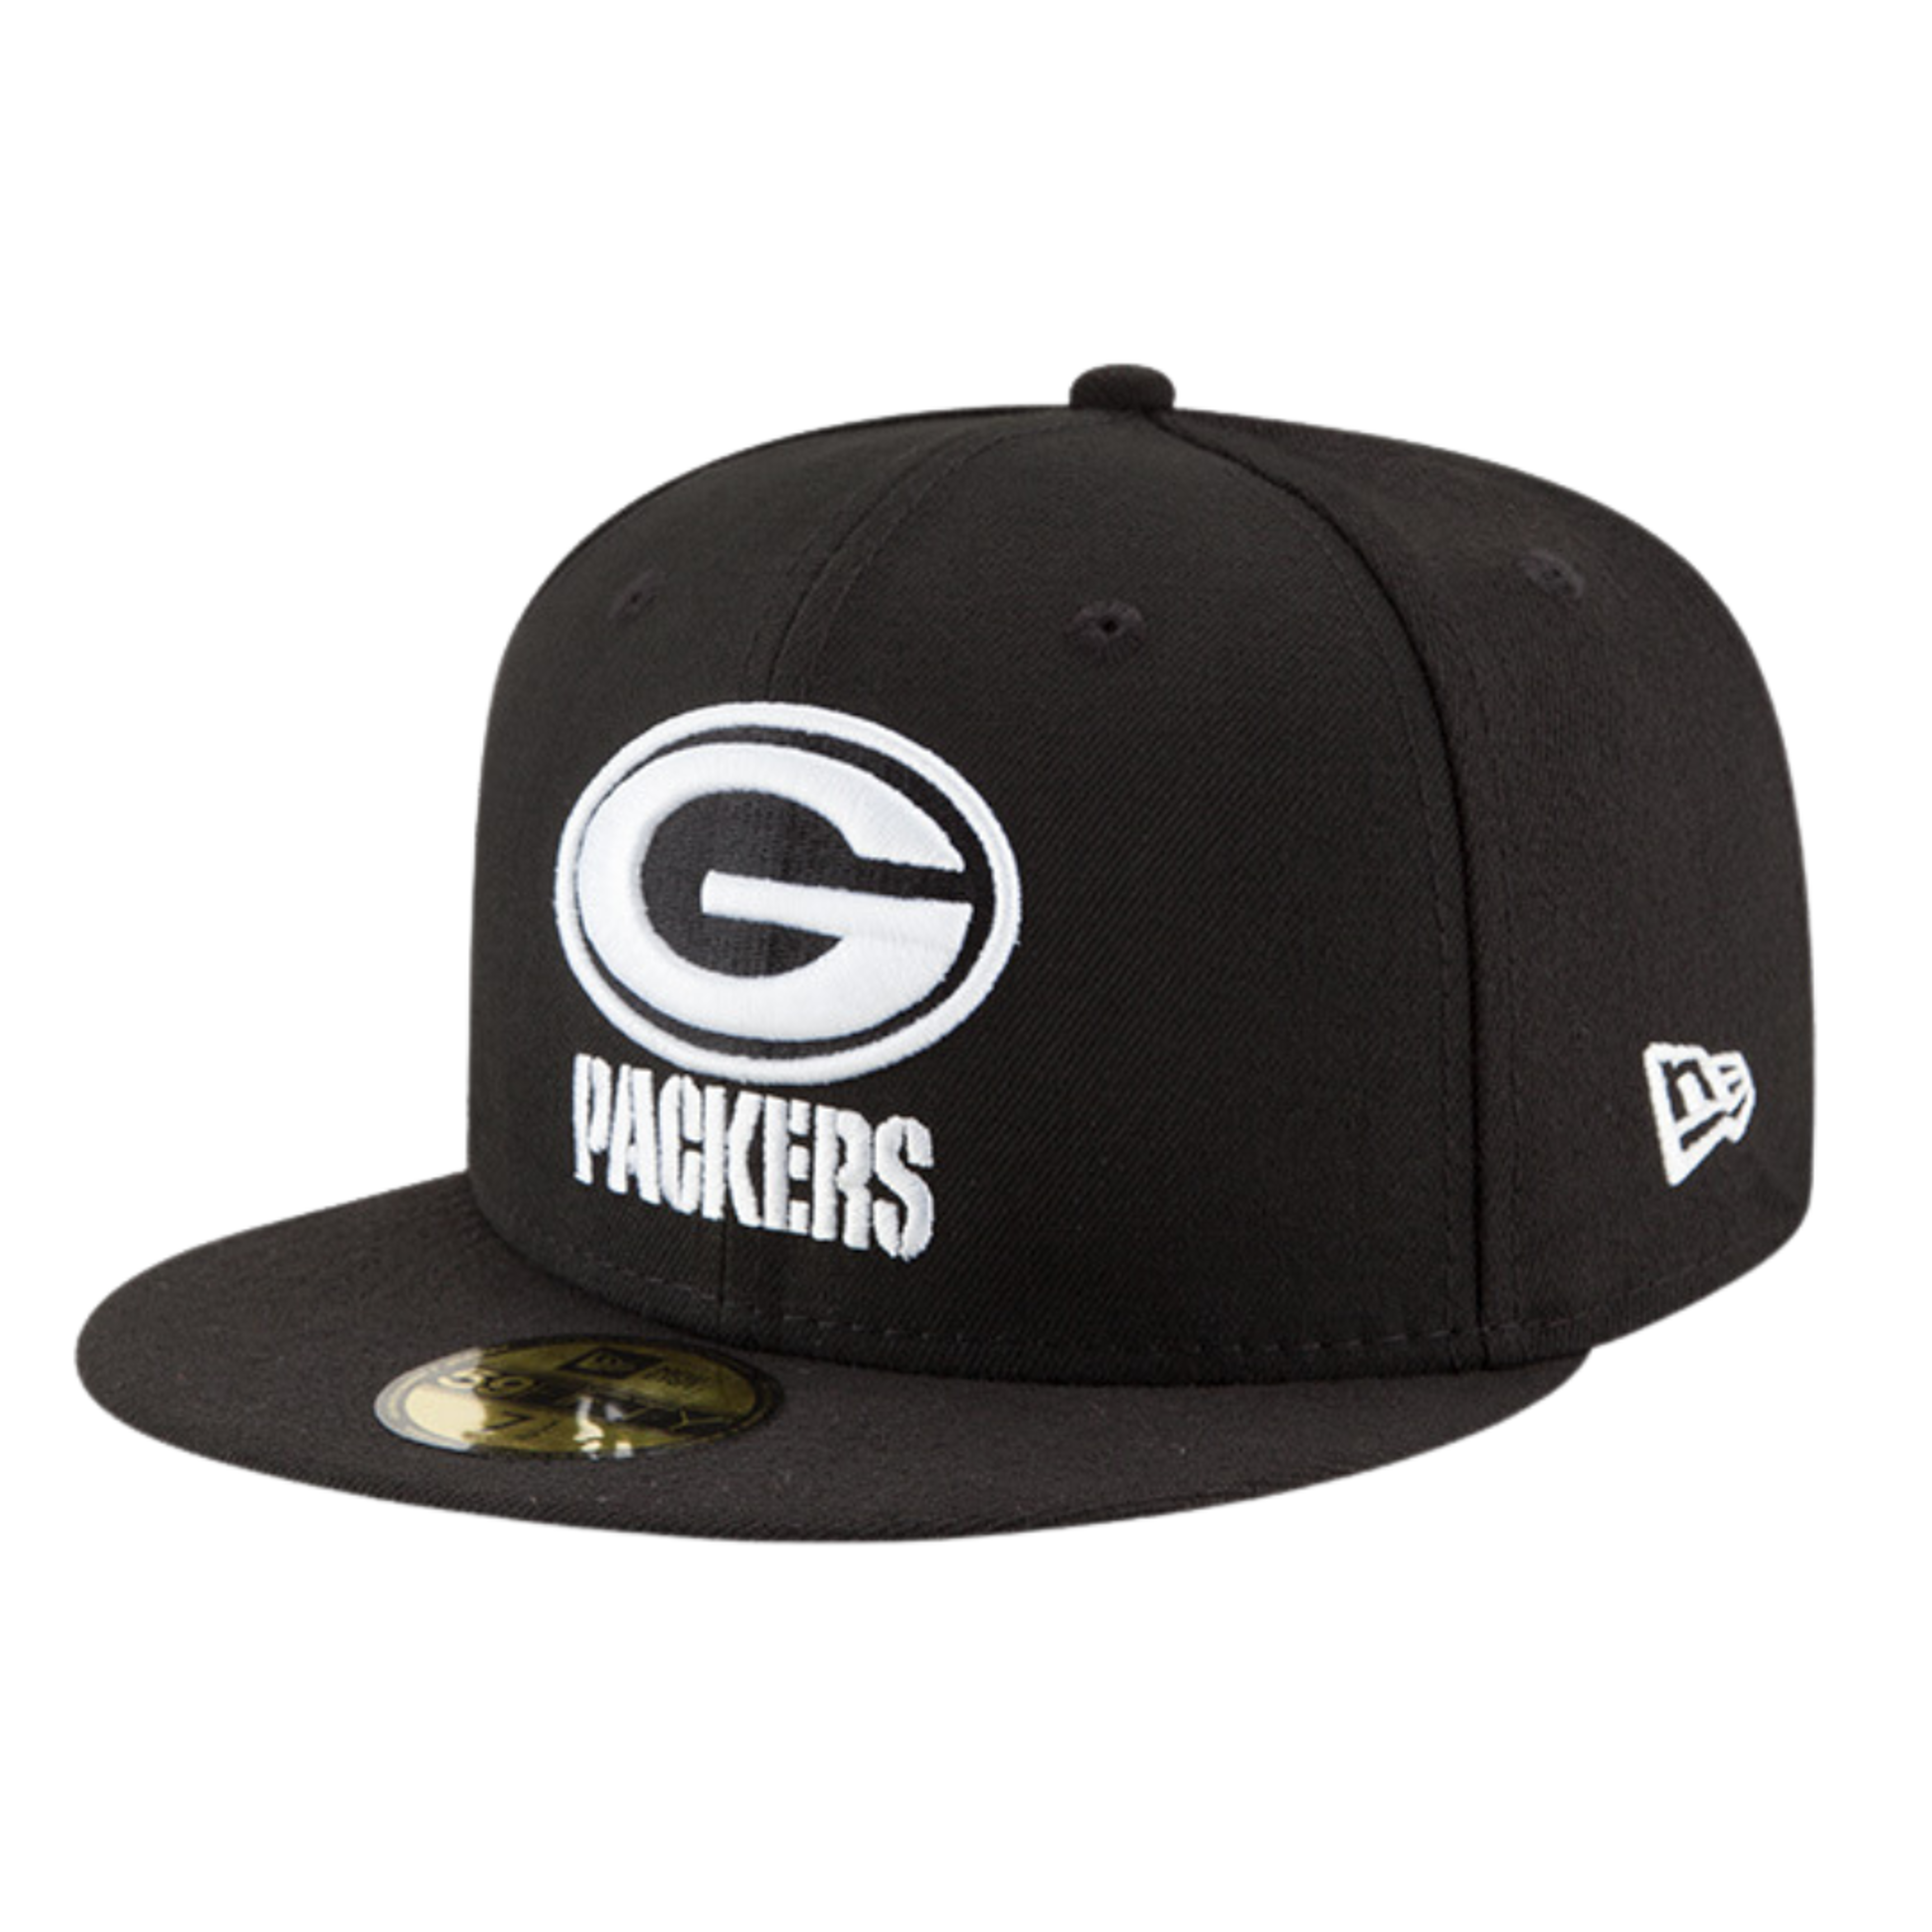 Alternate View 1 of Green Bay Packers Black and White 59FIFTY Fitted Hat